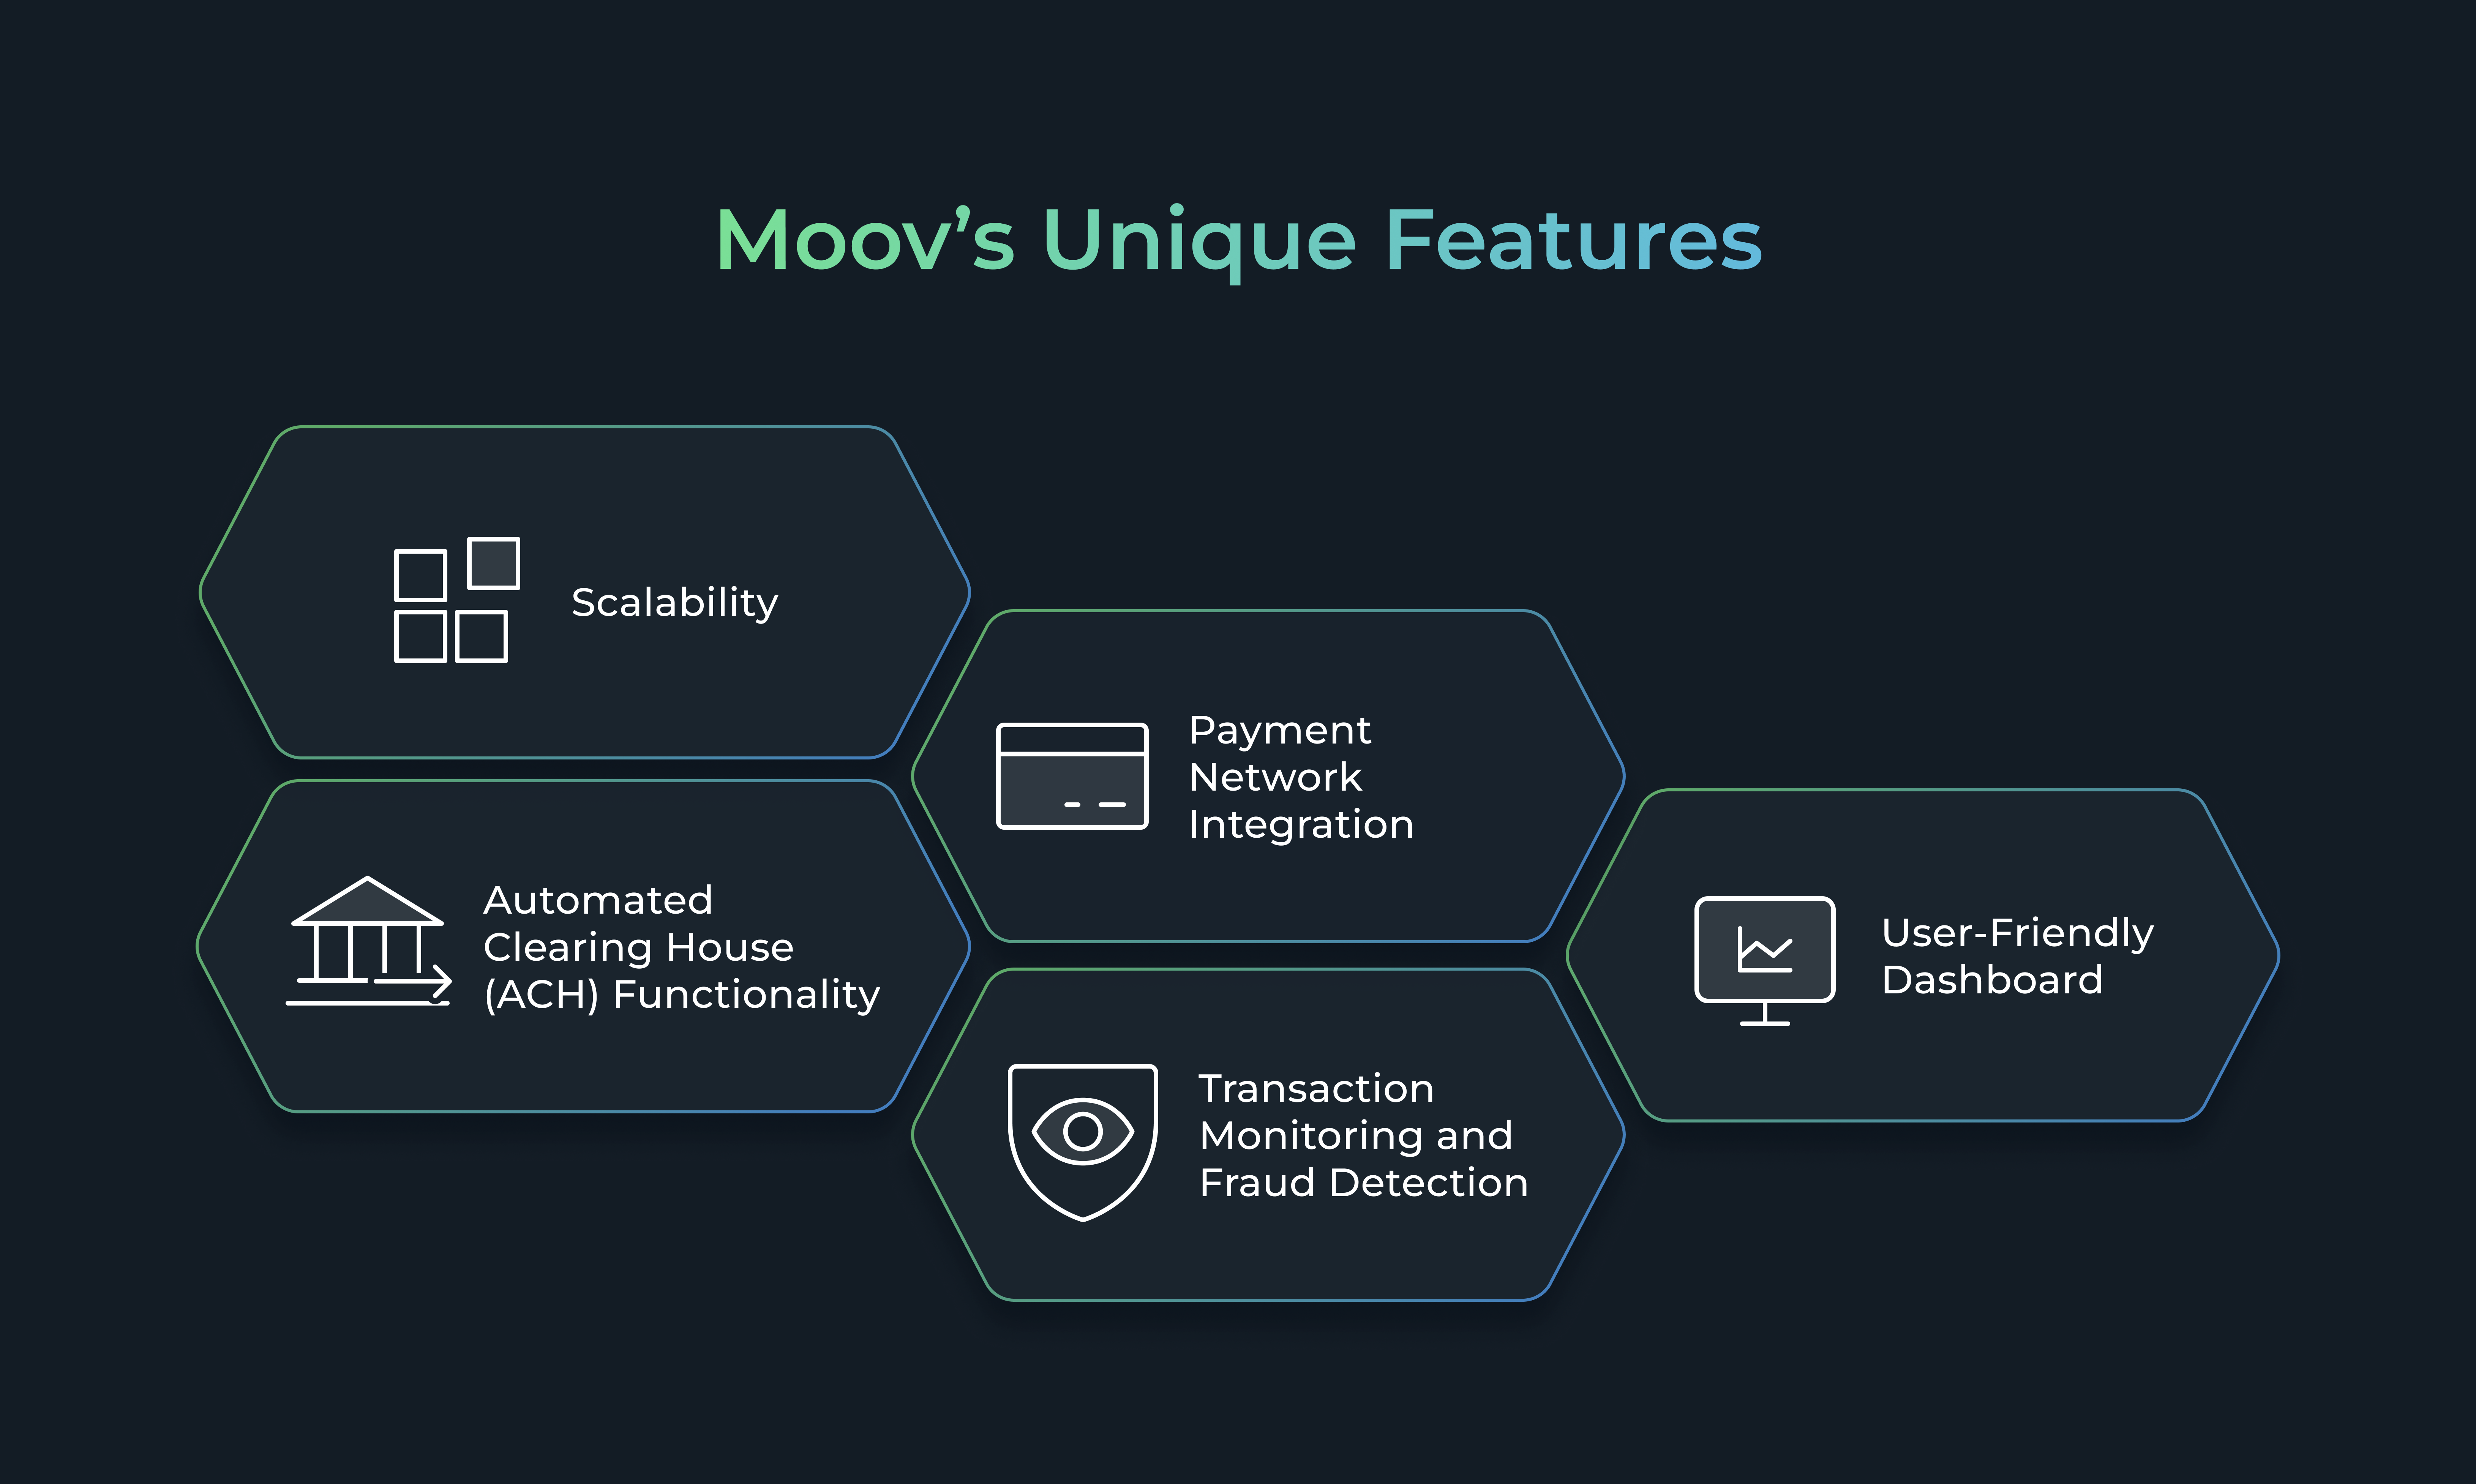 Moov’s Unique Features: Automated Clearing House (ACH) Functionality, Payment Network Integration, Transaction Monitoring and Fraud Detection, Scalability, User-Friendly Dashboard
